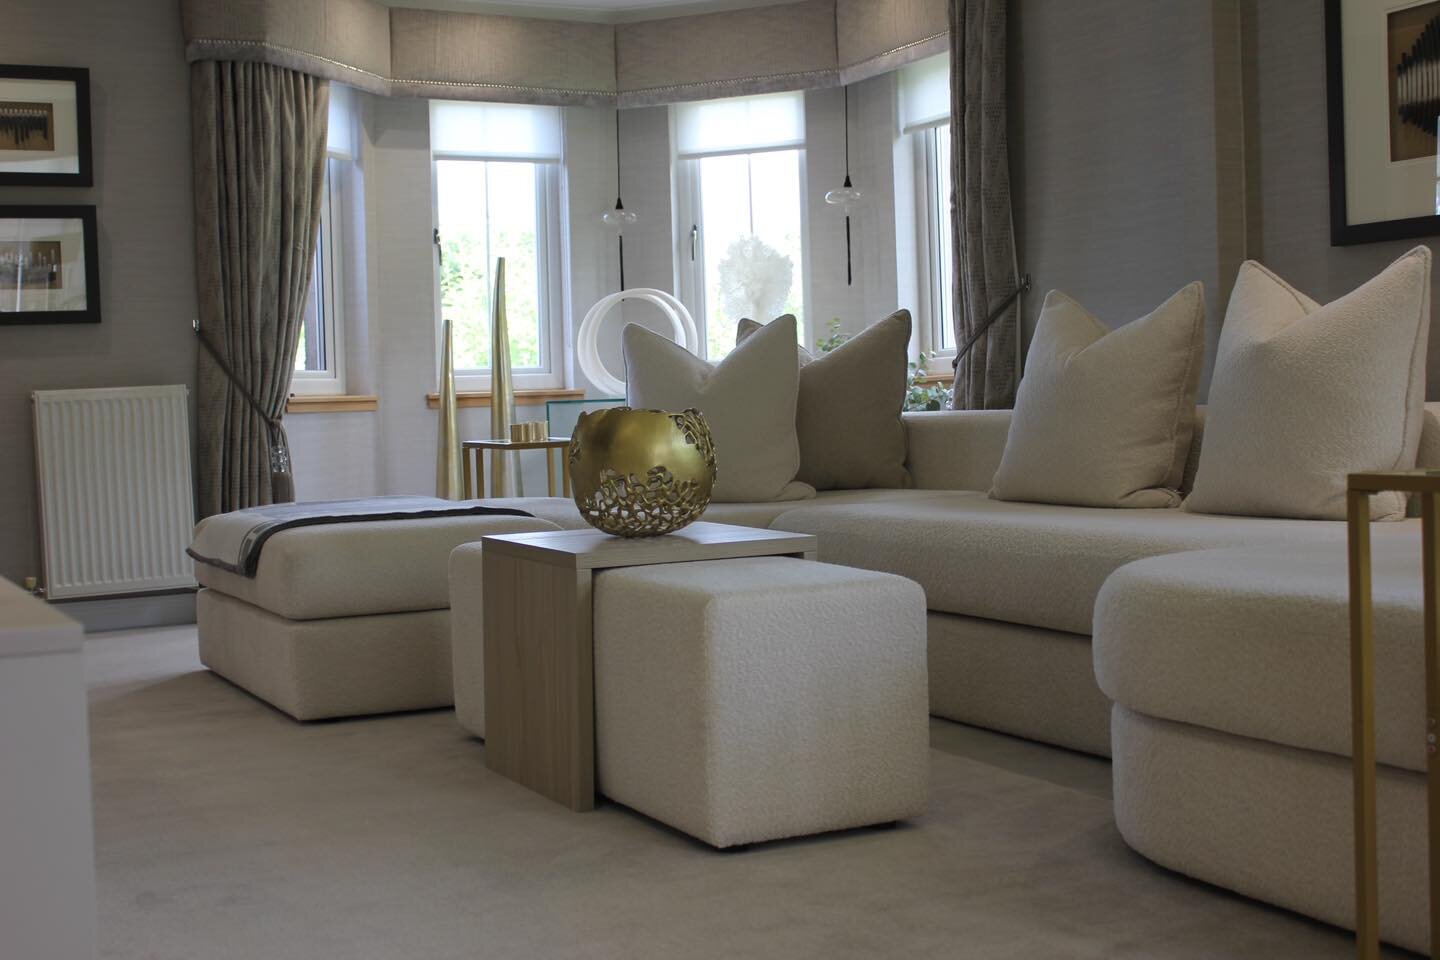 Did you know we can make bespoke sofas to any size and a variety of styles? Choose from our extensive range of fabrics to create a sofa that perfectly suits your home 🤍

Call us in the showroom on 01786445013 or message for more info on our services